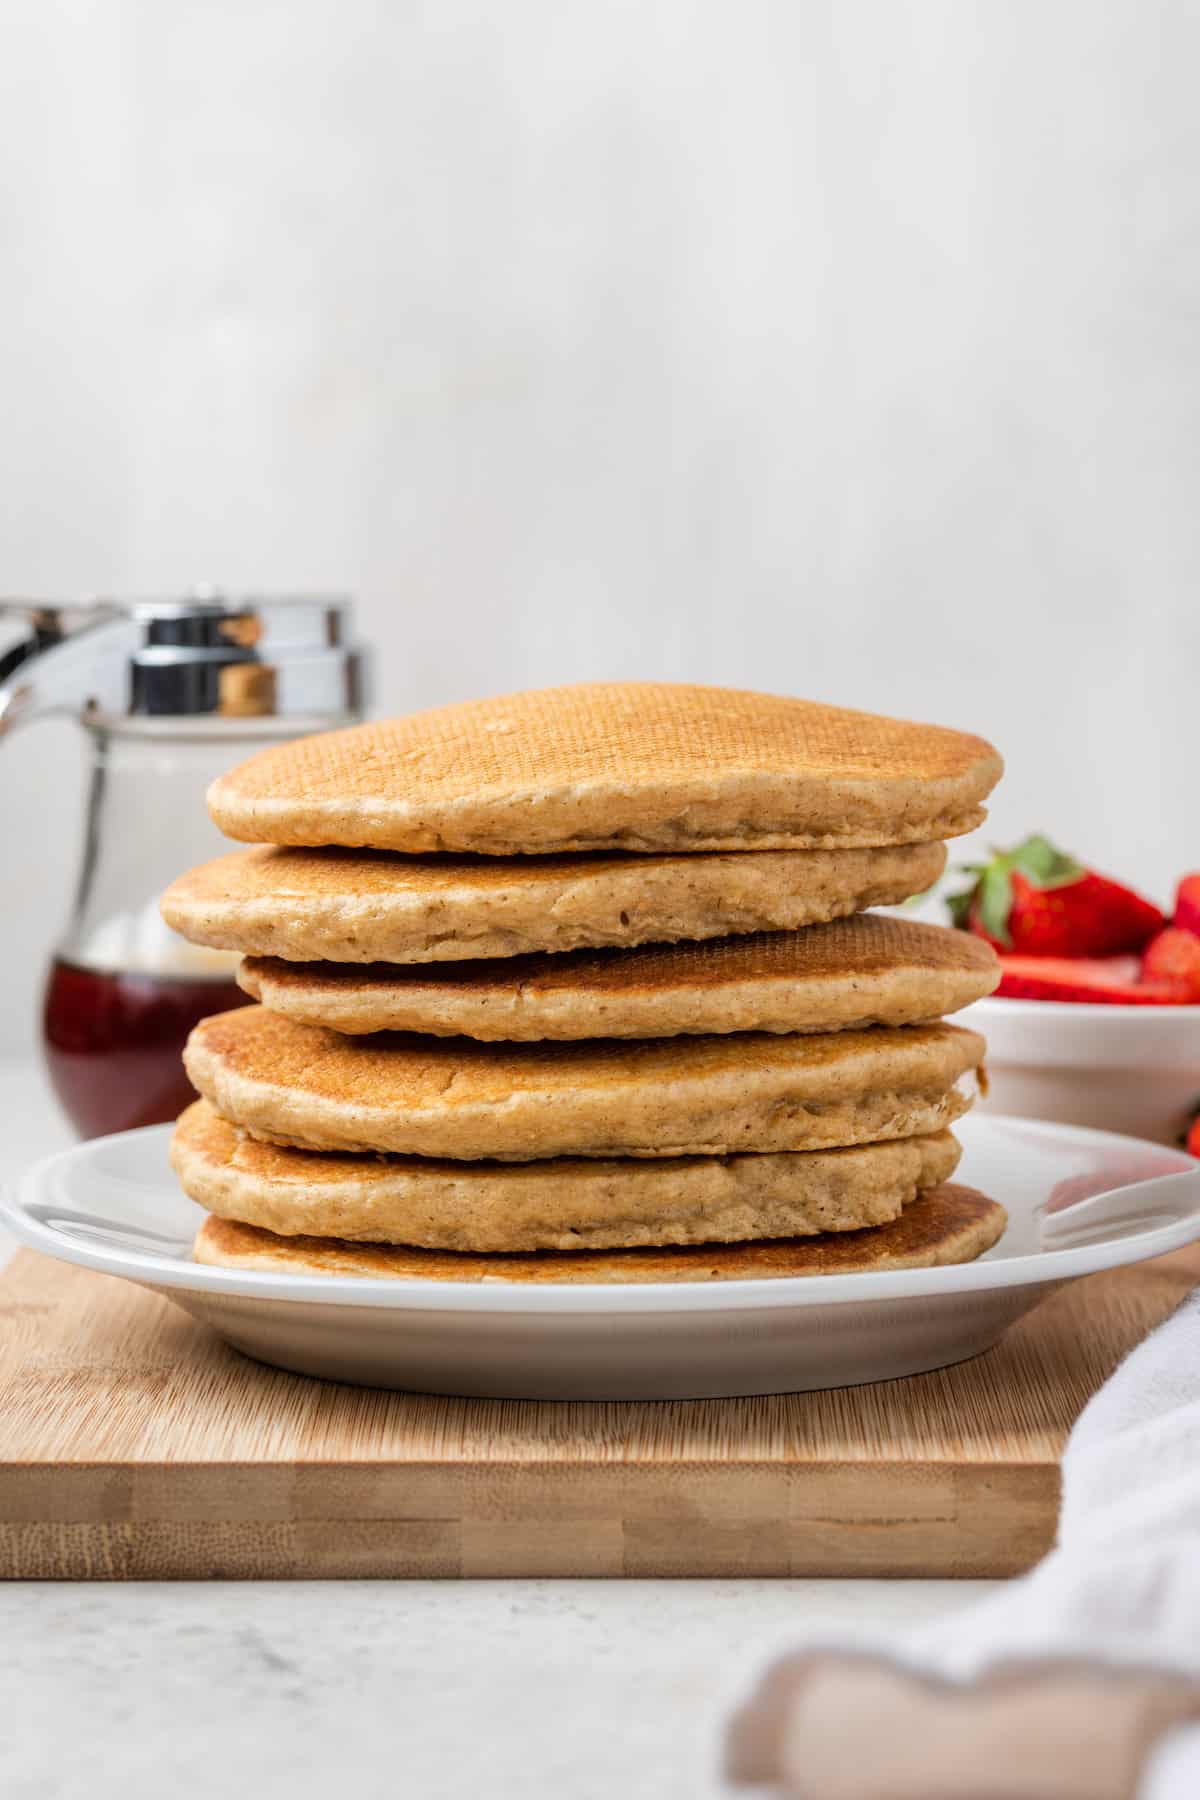 A stack of oatmeal pancakes on a white plate.